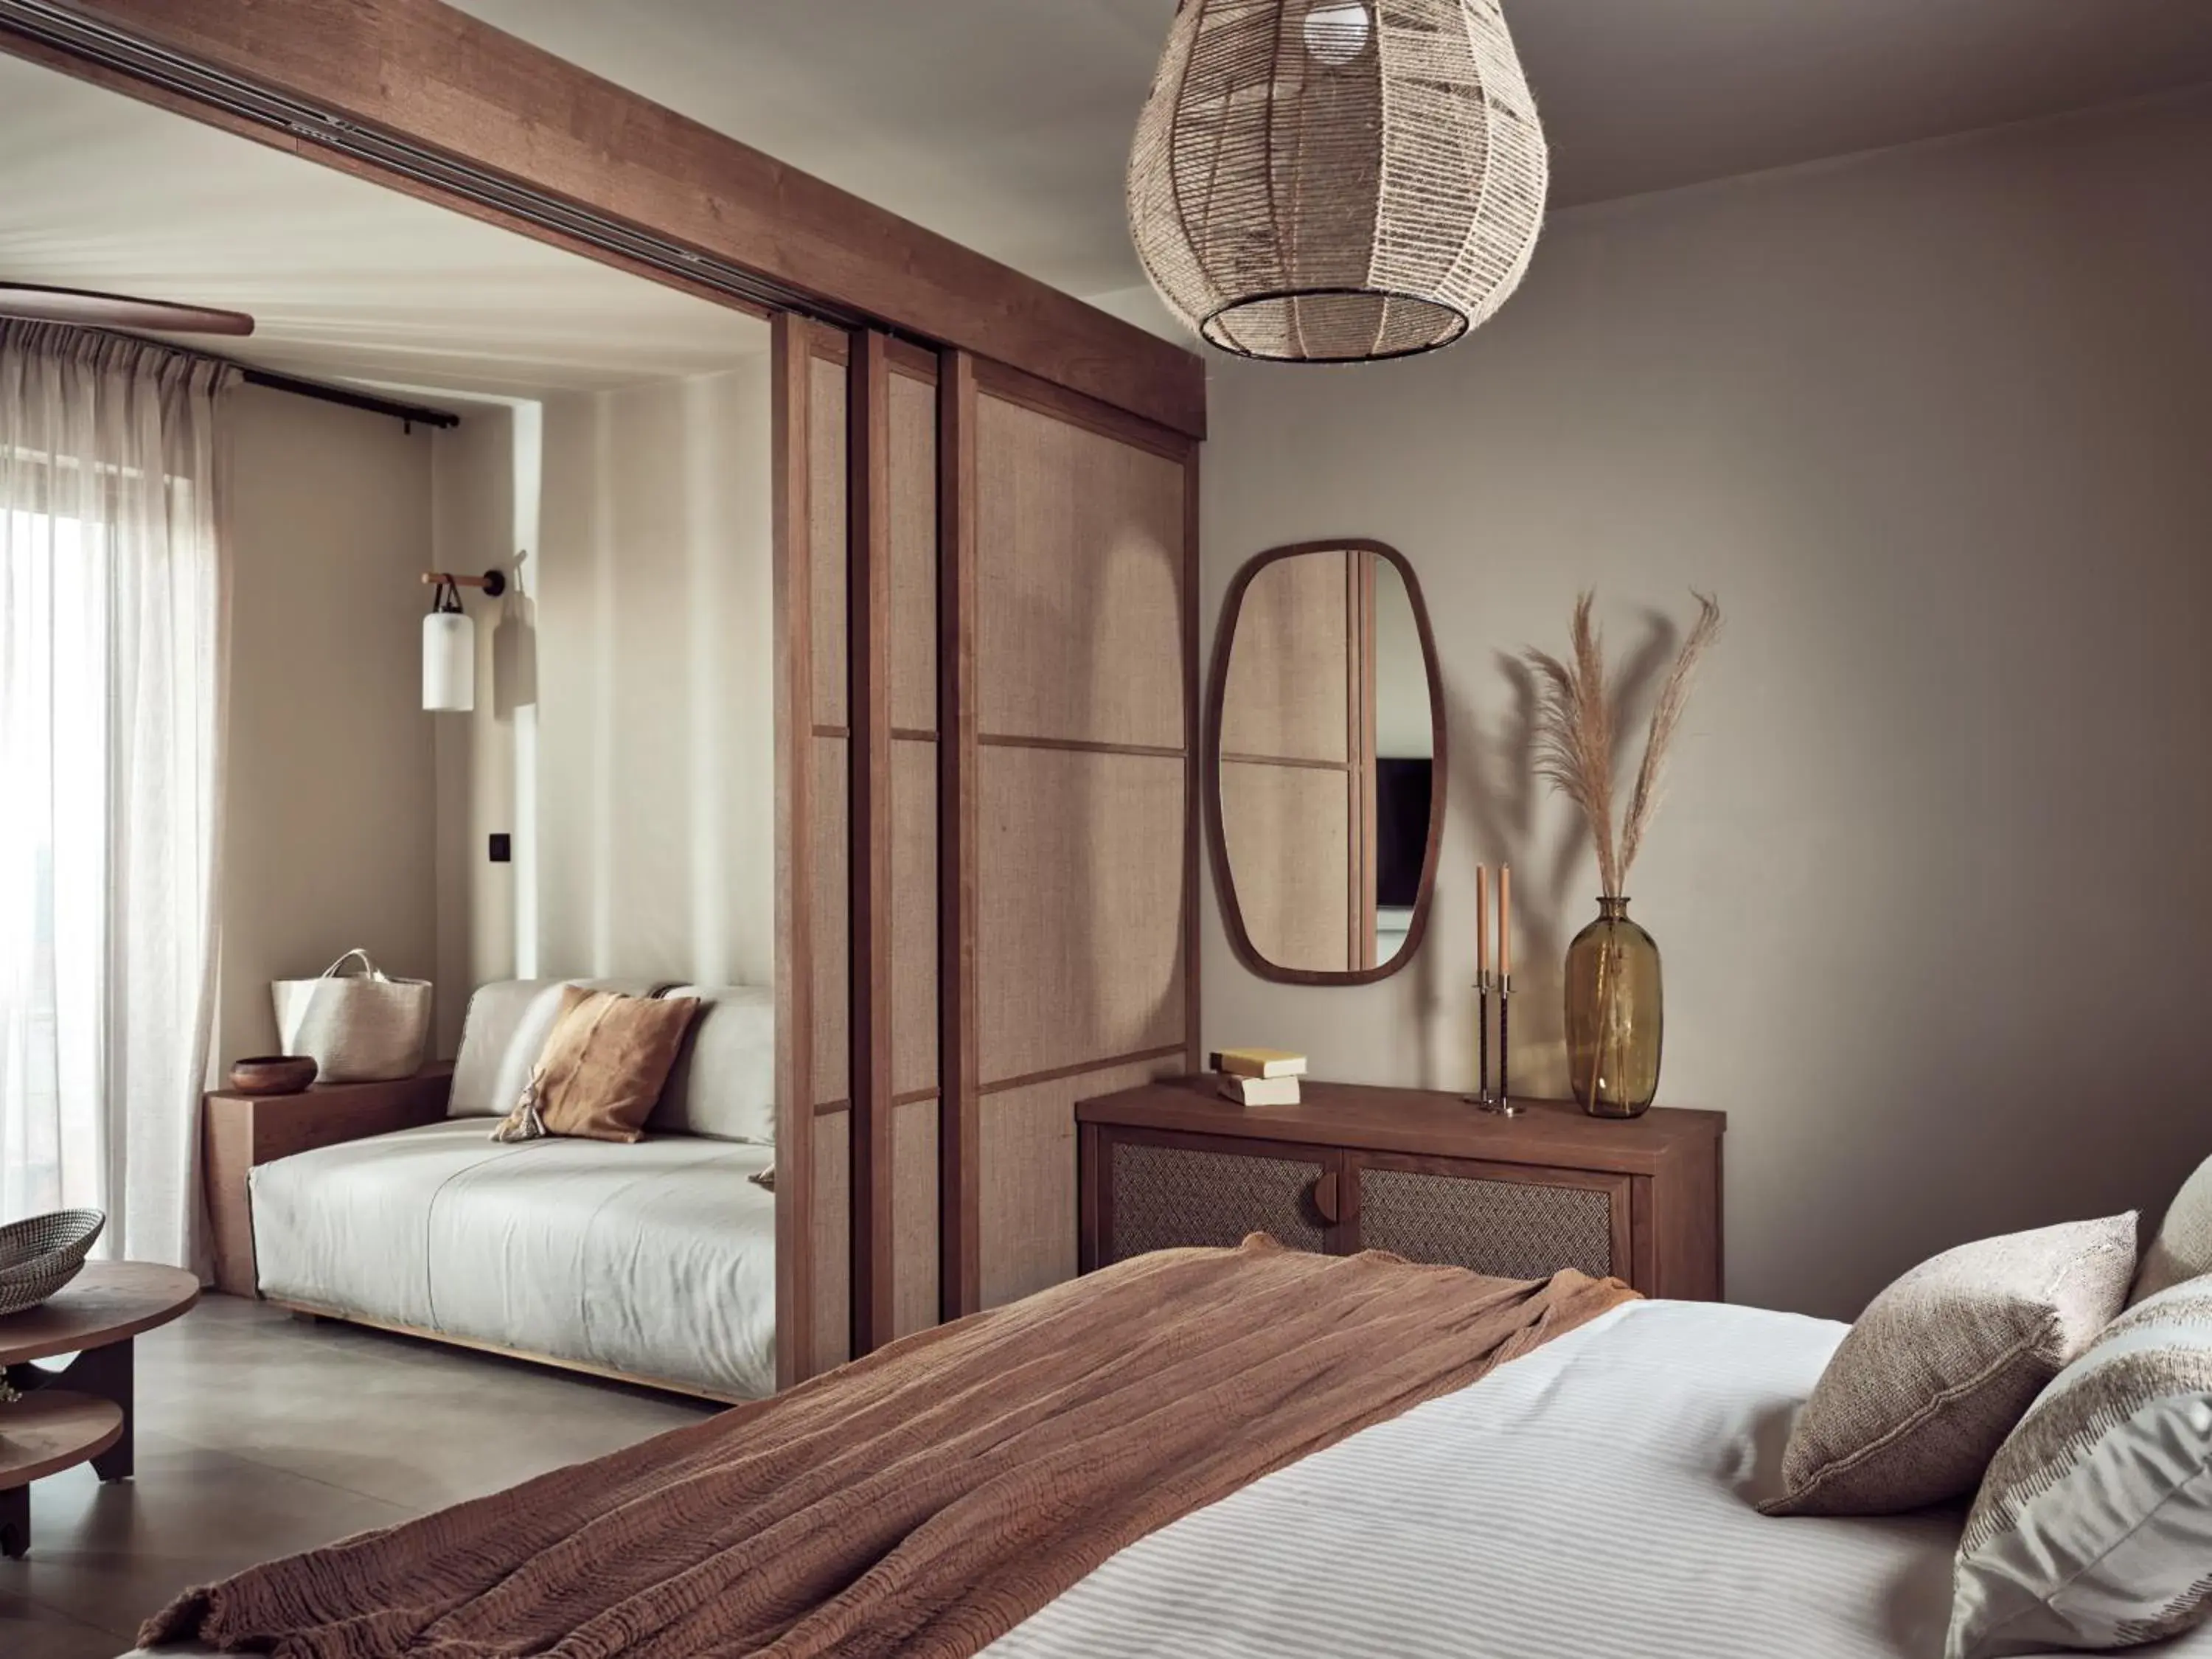 Bed in The Royal Senses Resort Crete, Curio Collection by Hilton